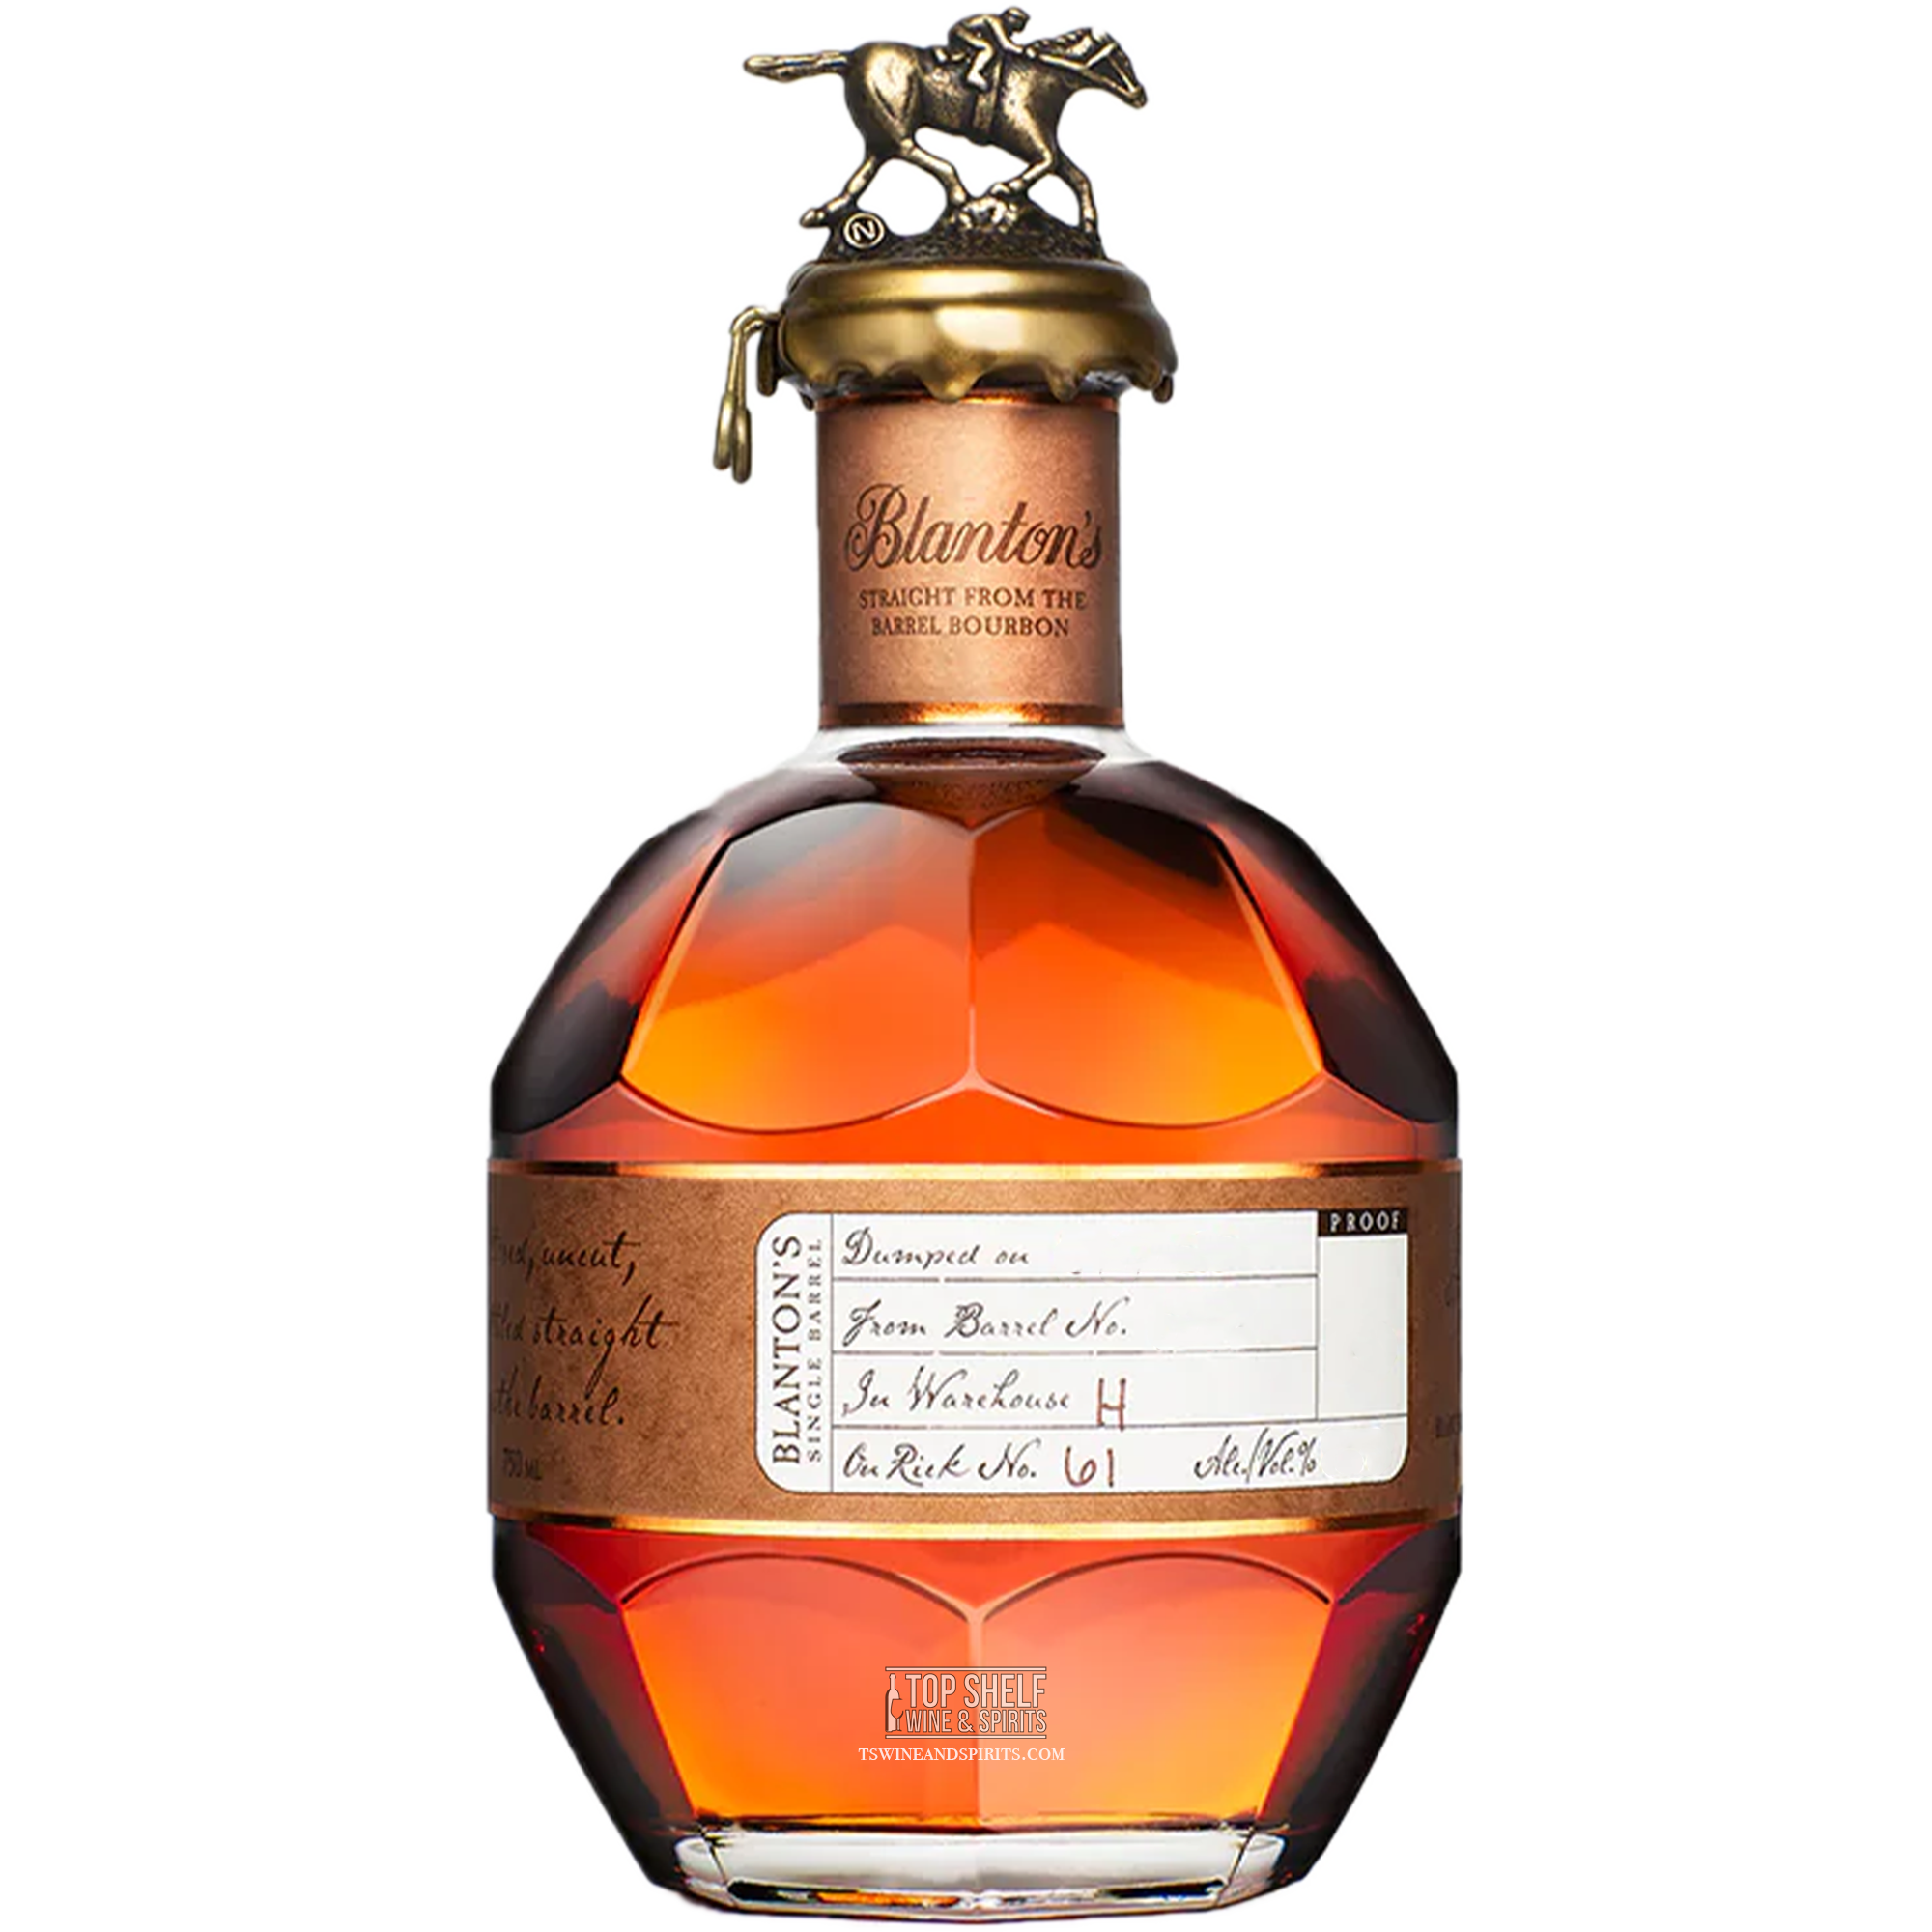 Blanton’s Straight From The Barrel